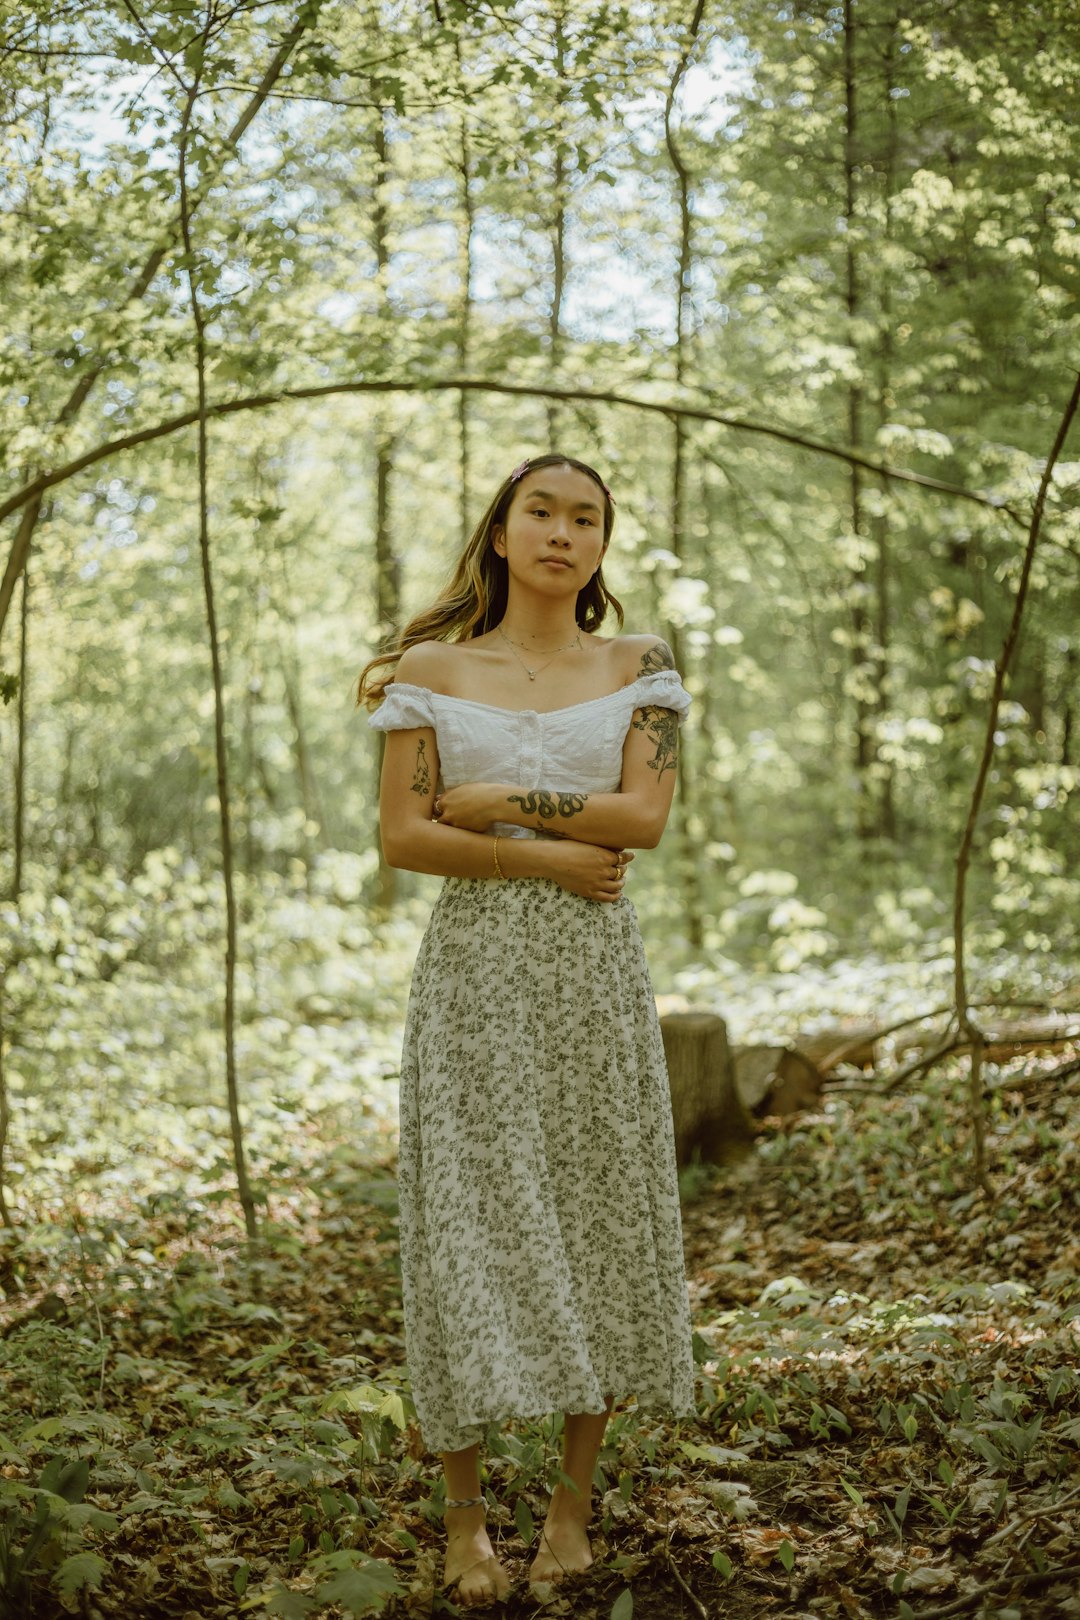 woman in white floral dress standing in forest during daytime